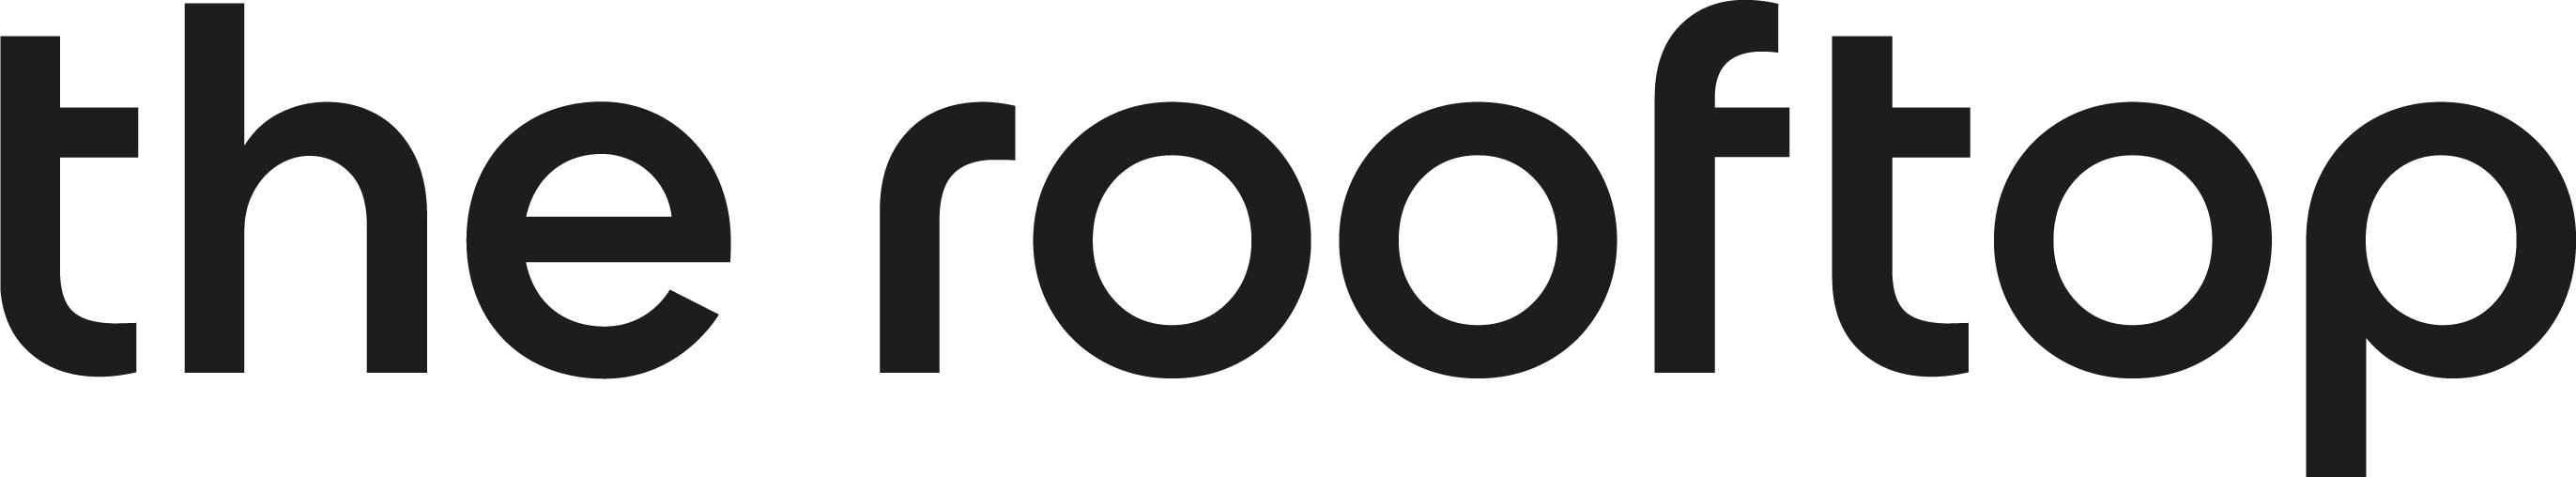 One Hundred Shoreditch Rooftop Logo